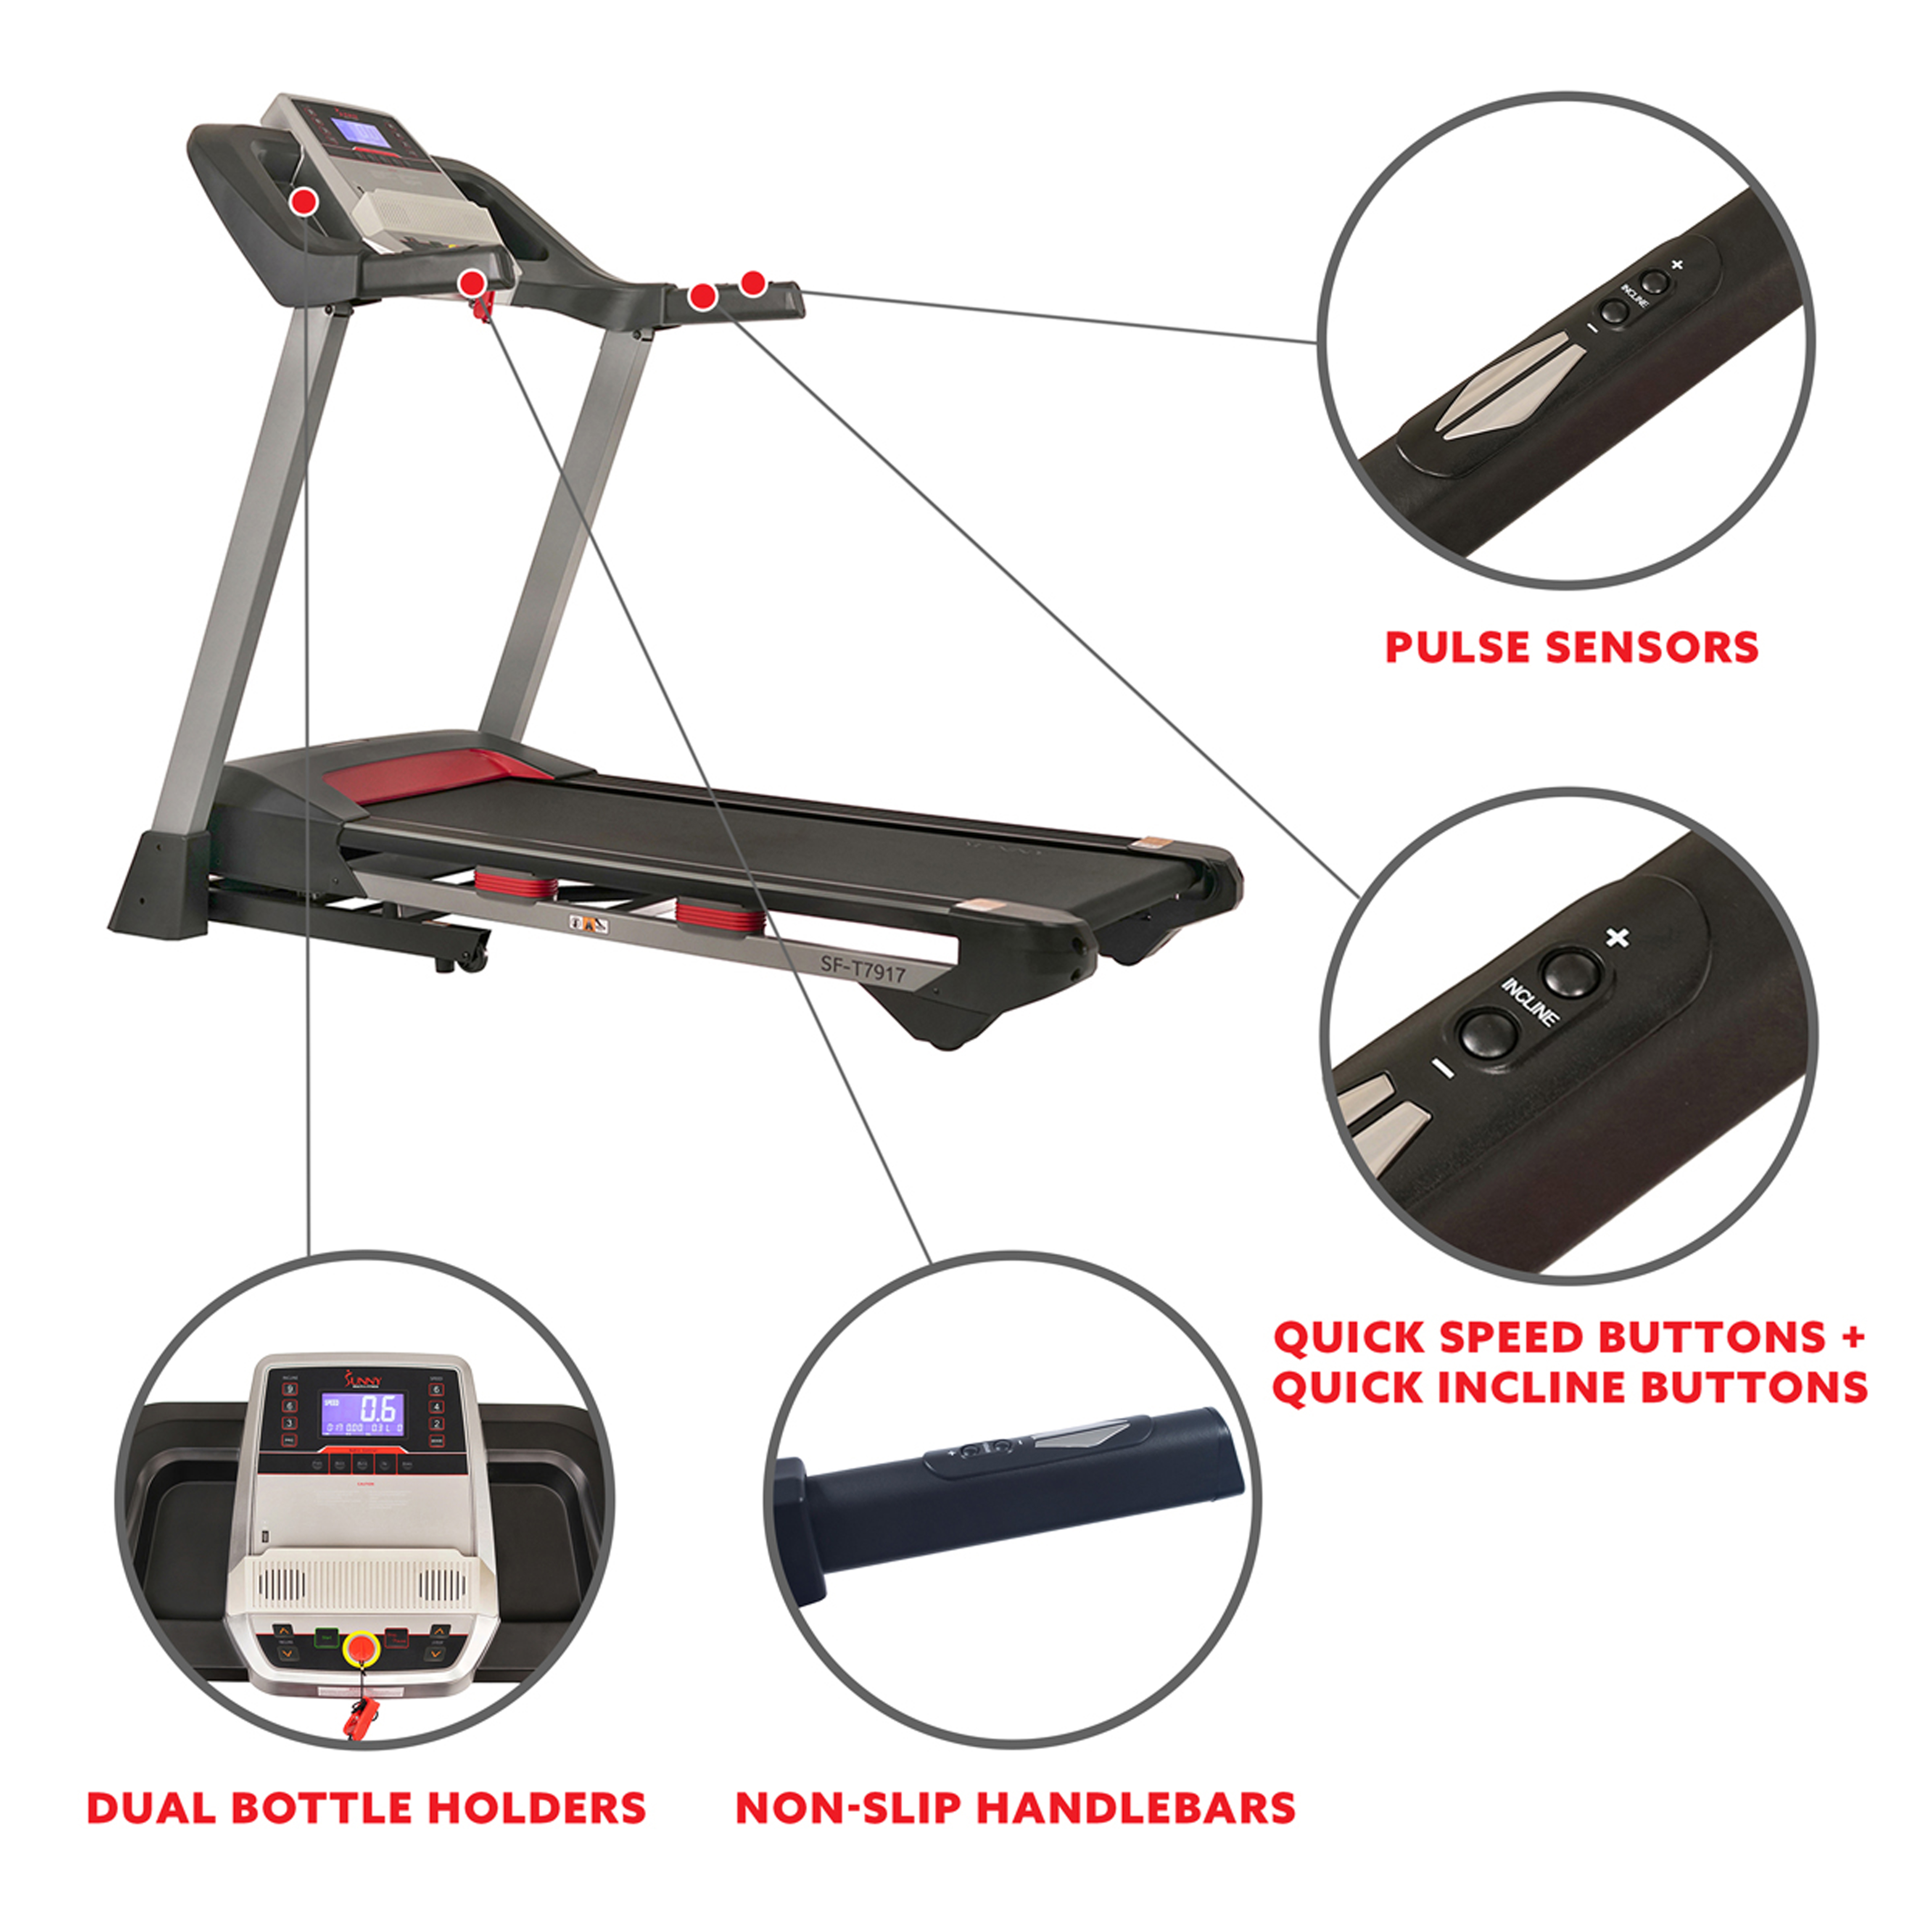 Sunny Health Fitness Electric Incline Treadmill, Bluetooth Speakers, USB Charge Function, Home Workout Exercise Machine, SF-T7917 - image 4 of 13